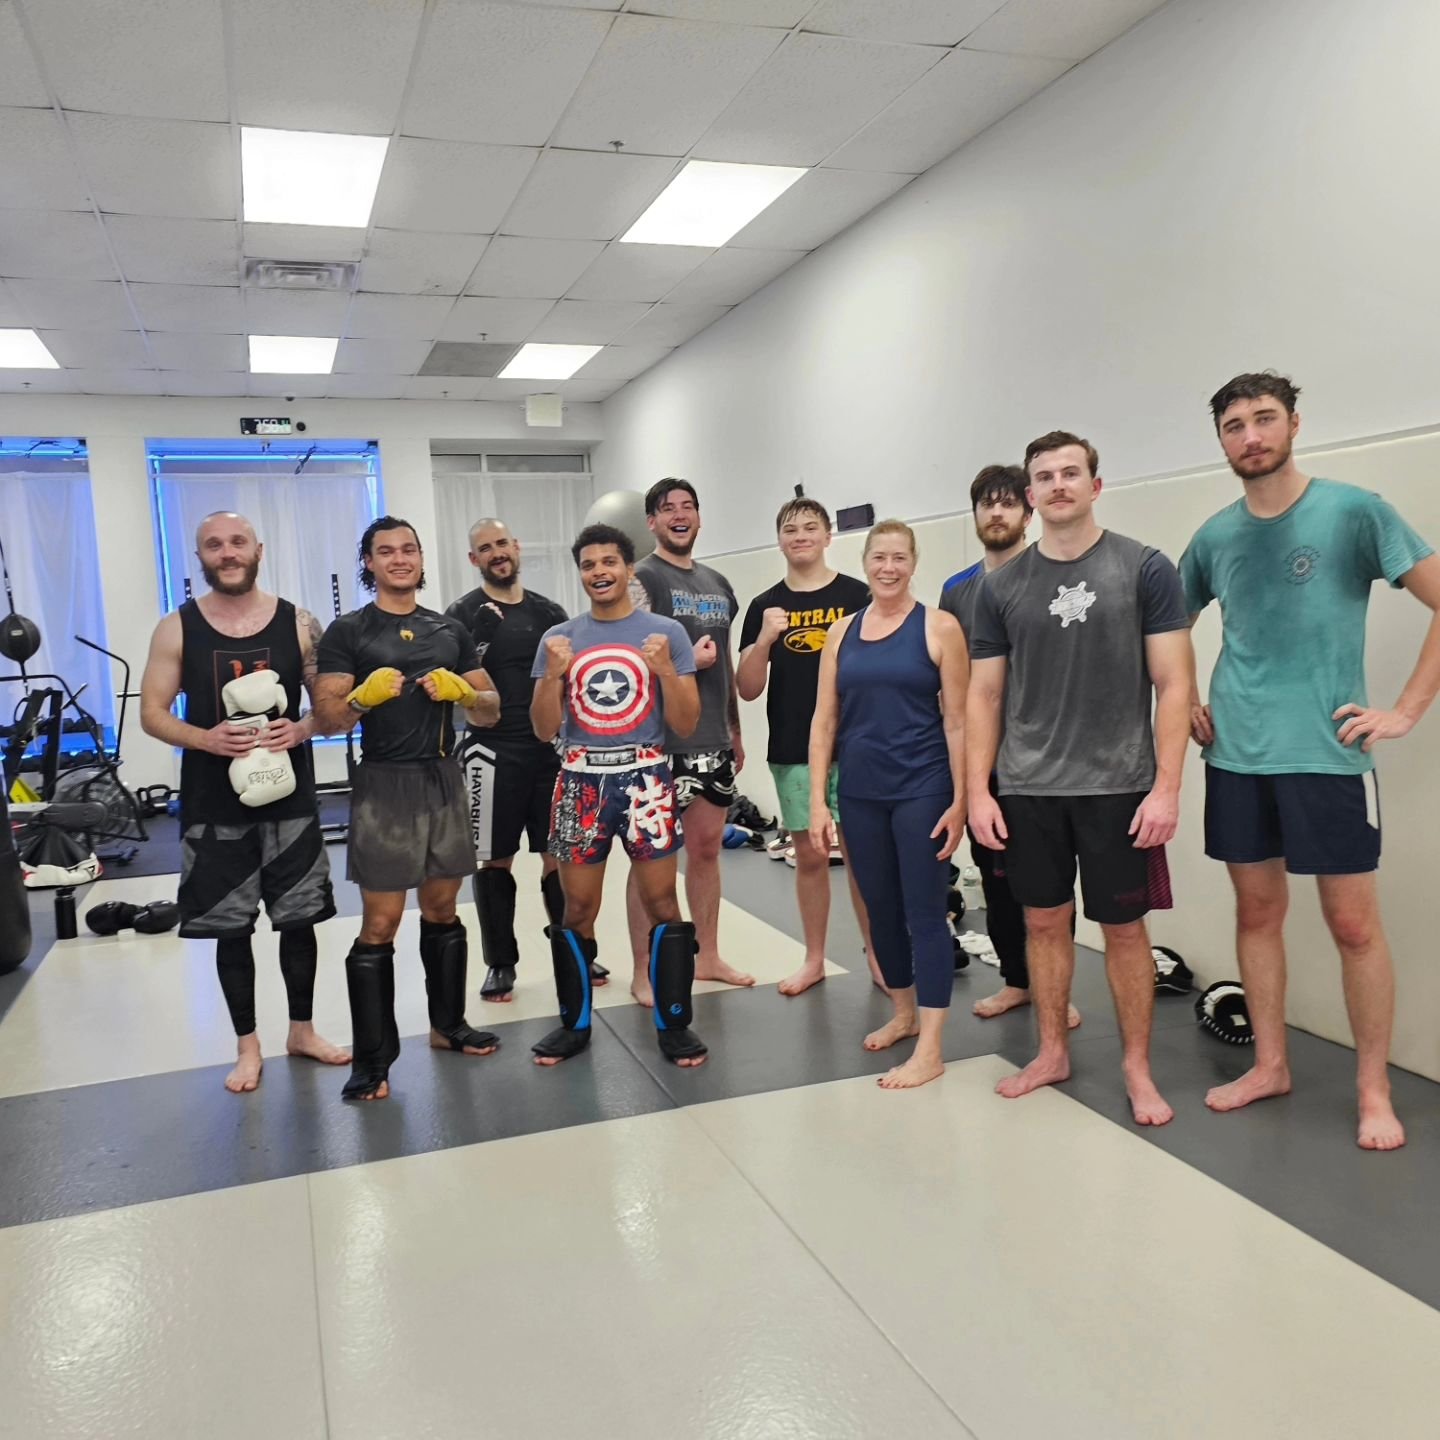 @sandrakay65 I'm back from vacation and back to doing what I love, coaching this team! #kickboxing #muaythai #greatday #goodlife #mondaynight #team #teamwork #academyofjj